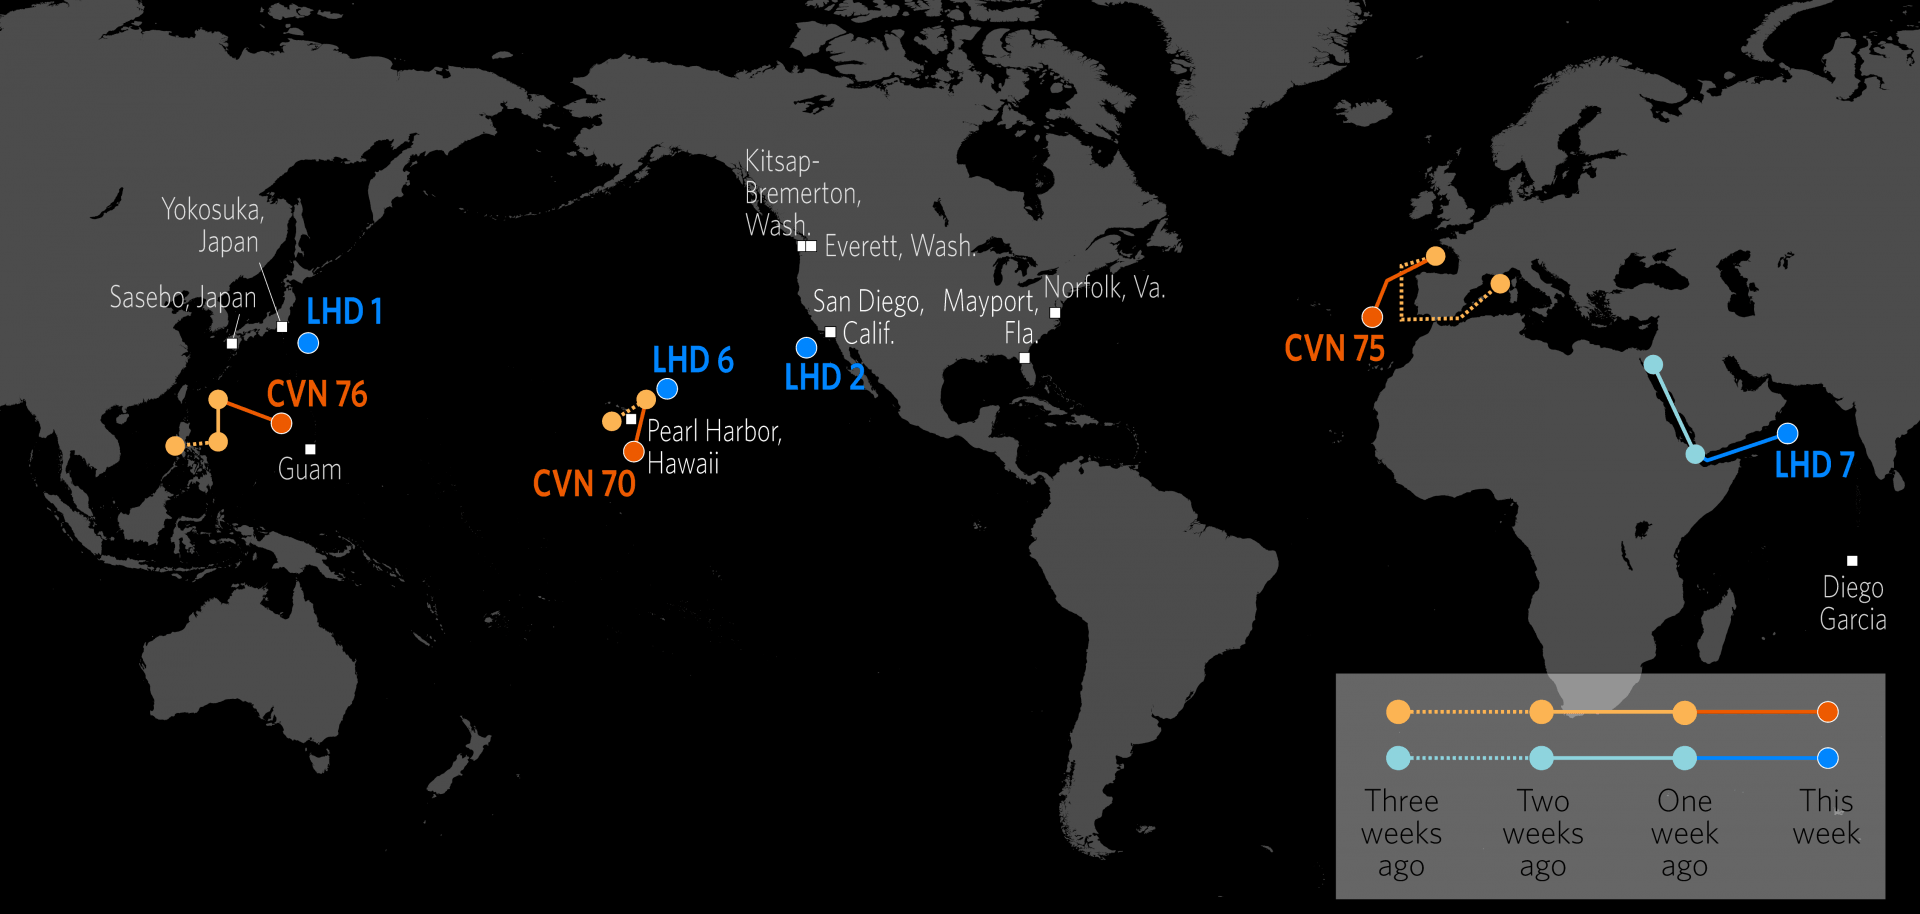 Naval Update Map: July 19, 2018